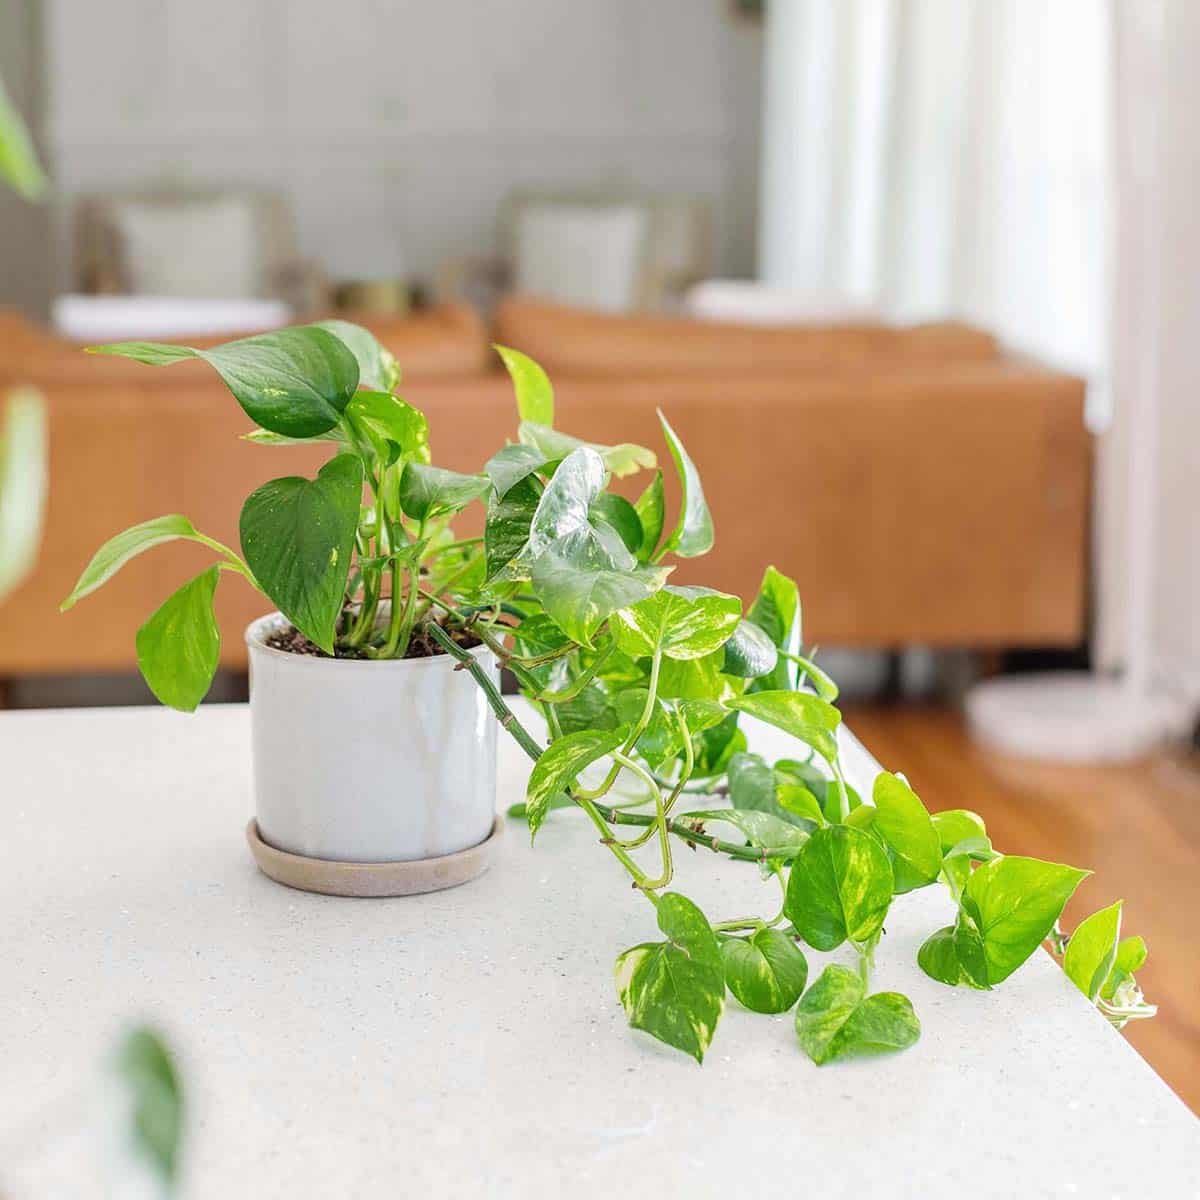 Find out how to Look after Golden Pothos